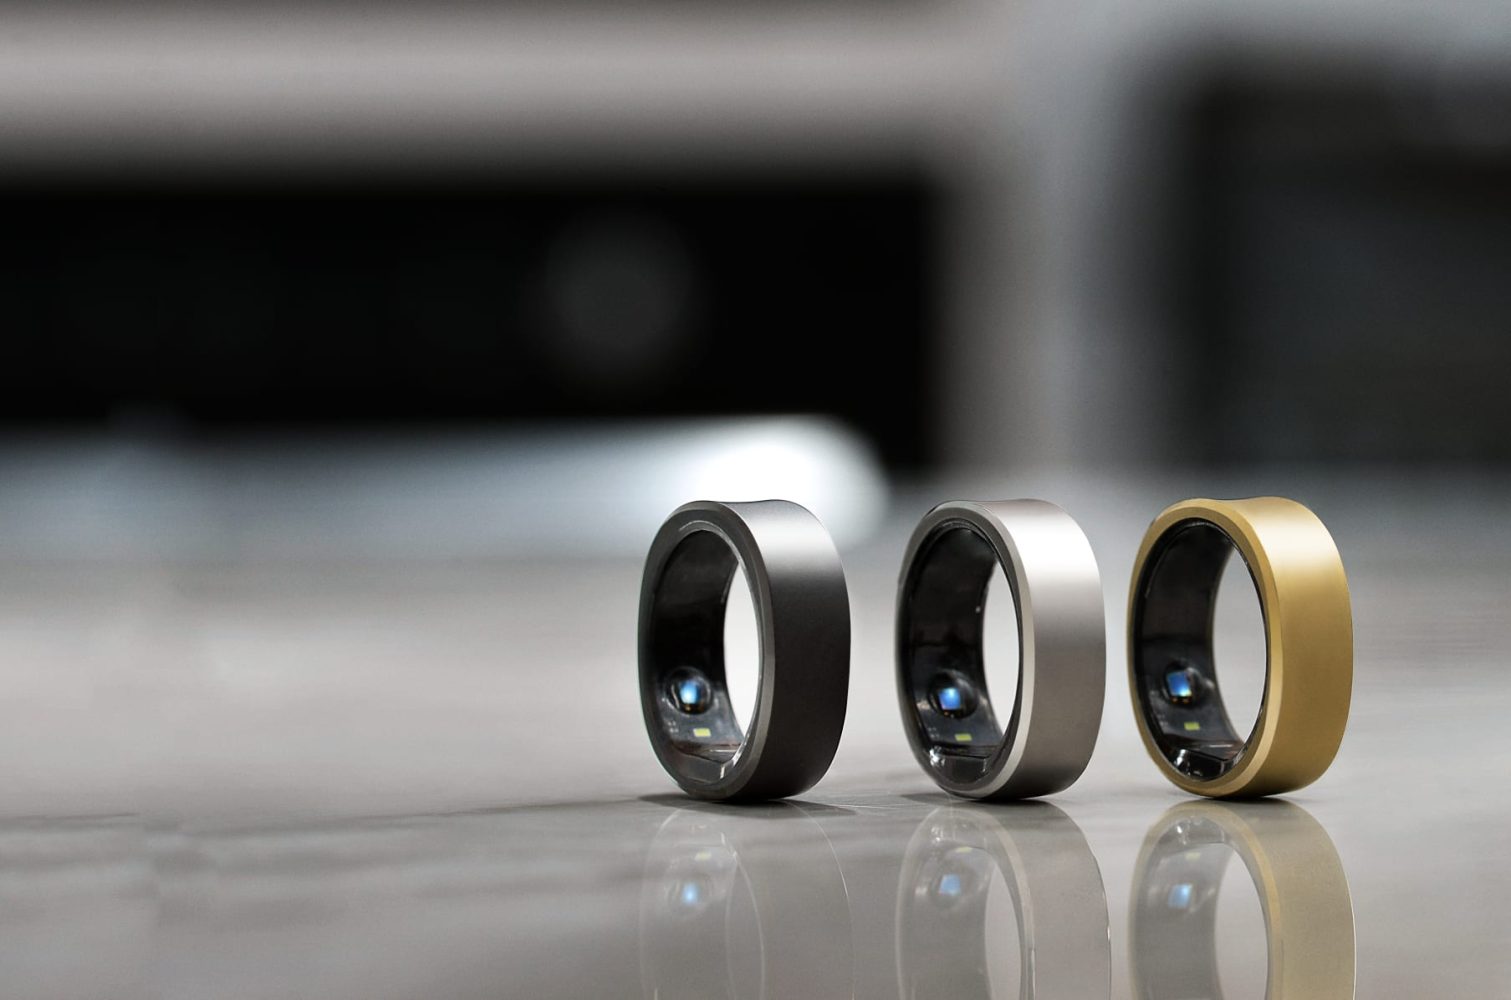 Oura Ring 3 vs RingConn Smart Ring: What is the difference?